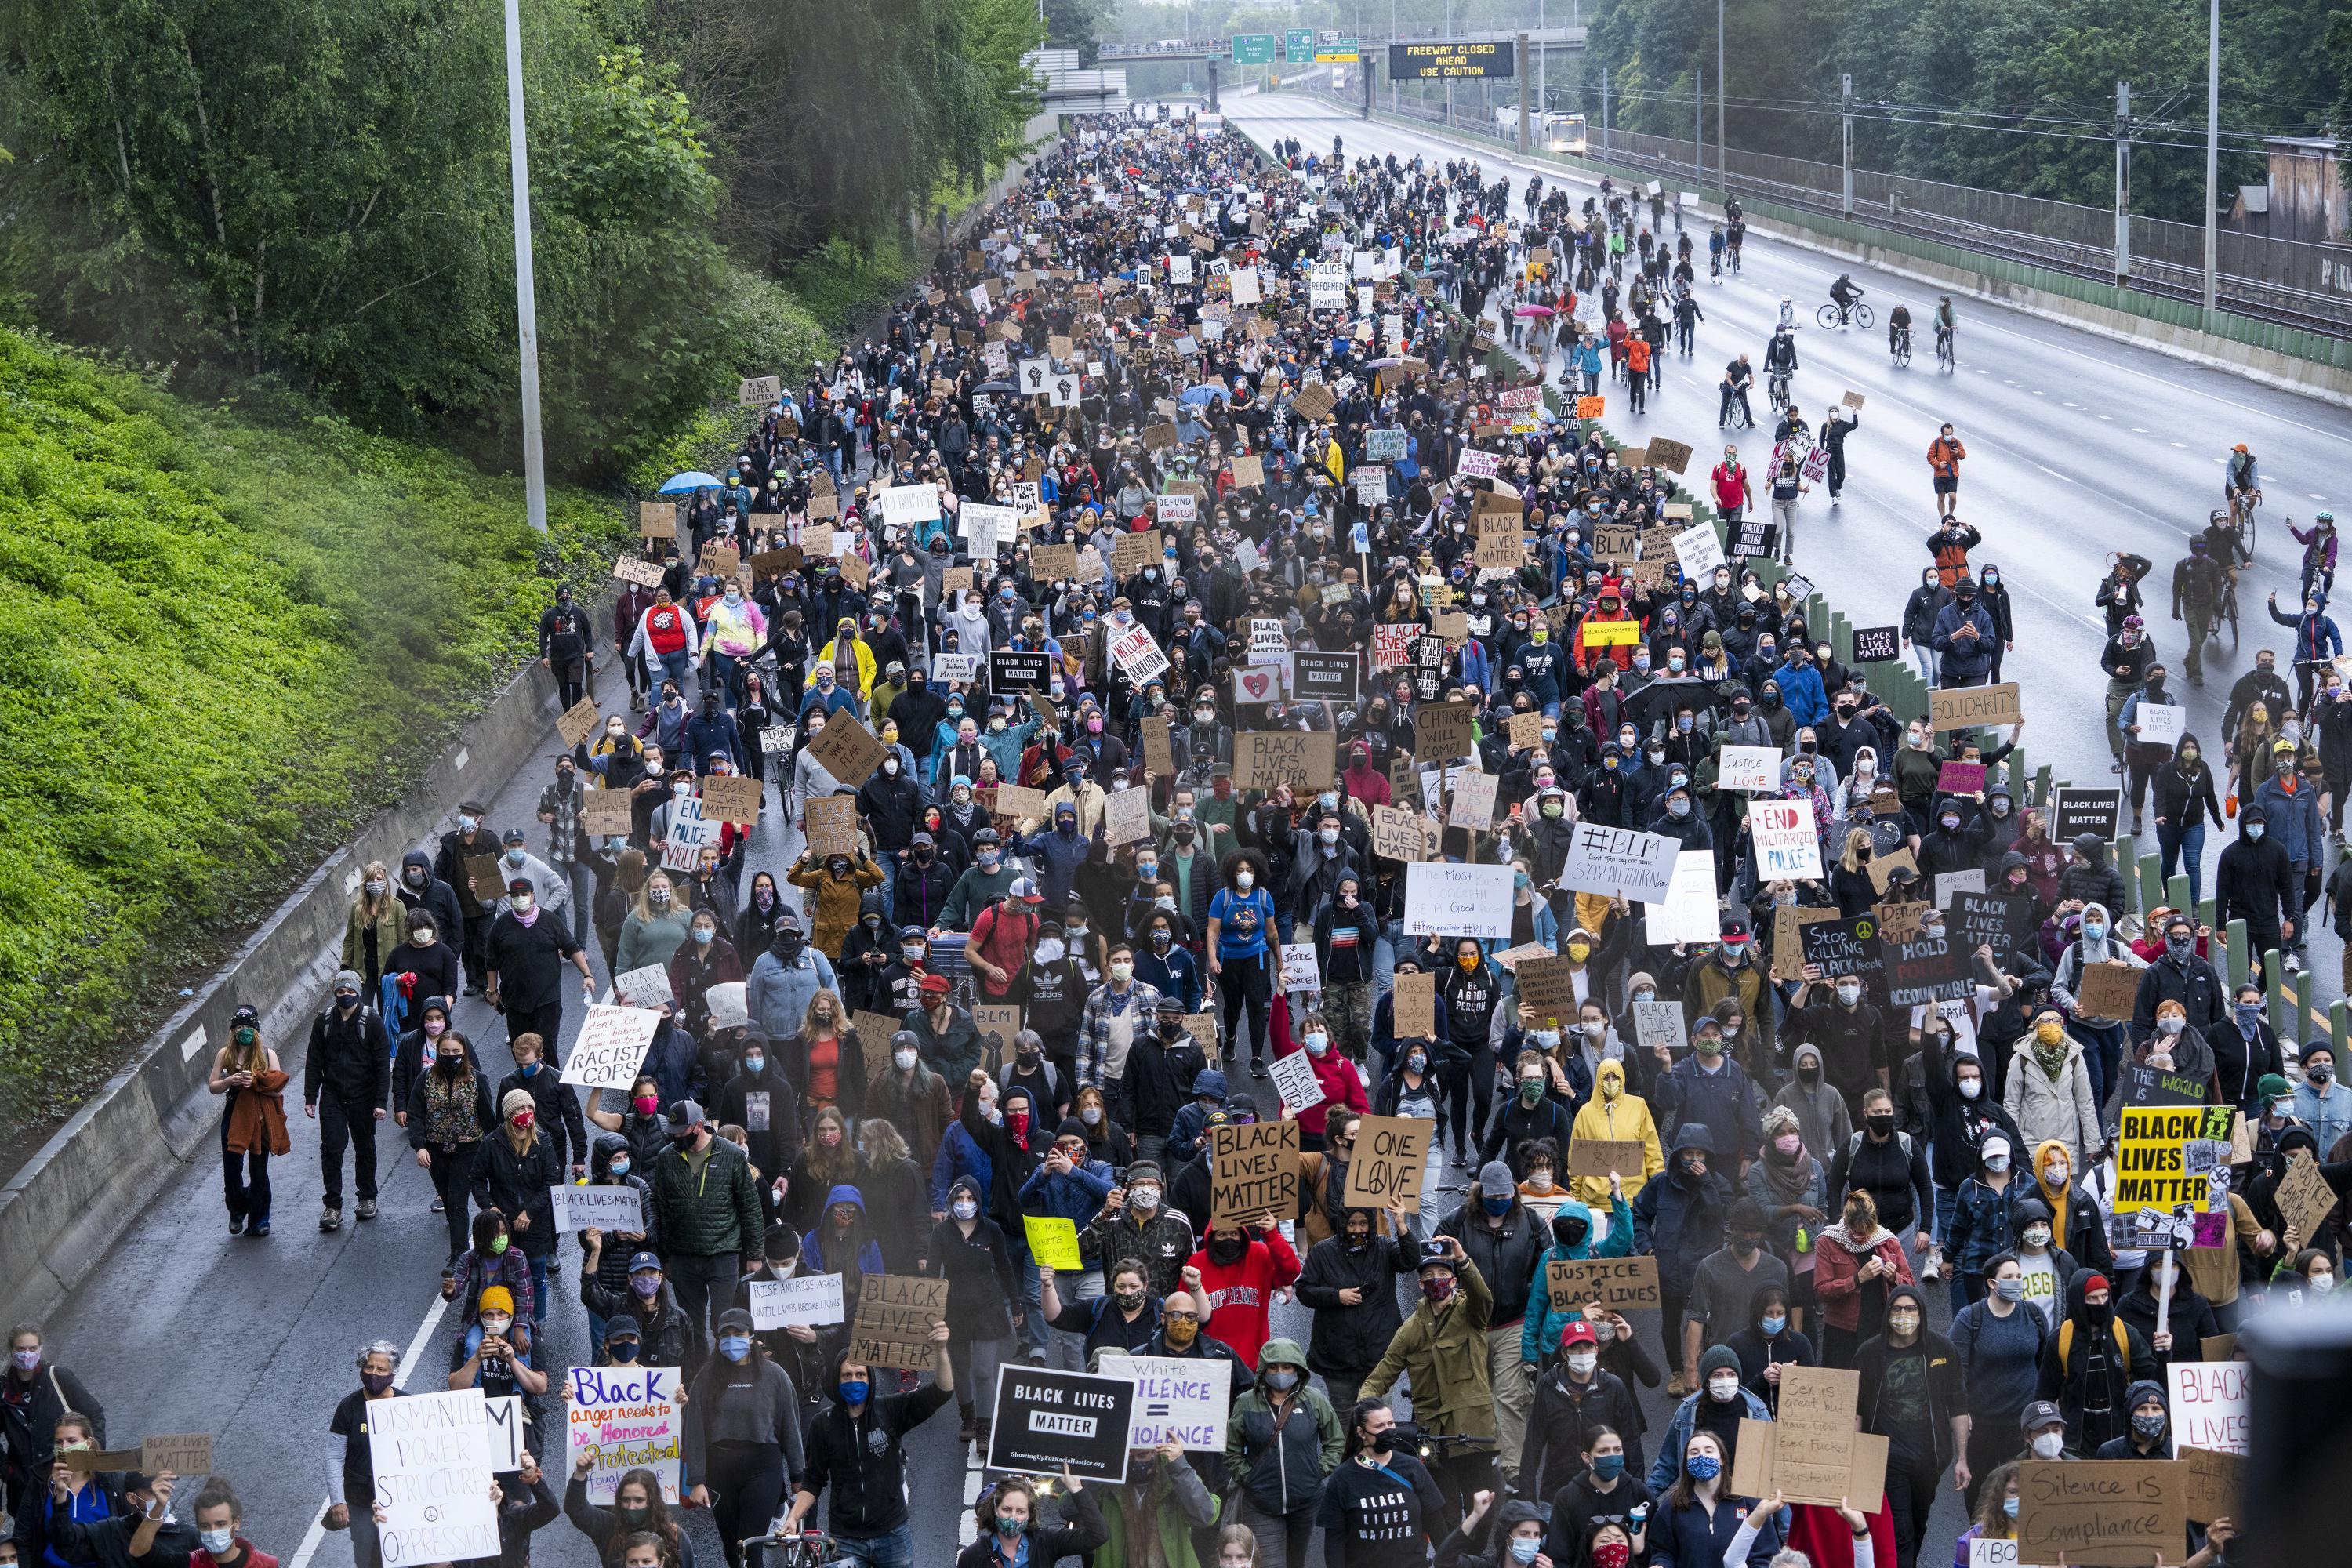 Protesters marching against racist violence and police brutality block traffic on Highway 84 in NE Portland on June 8, 2020. 